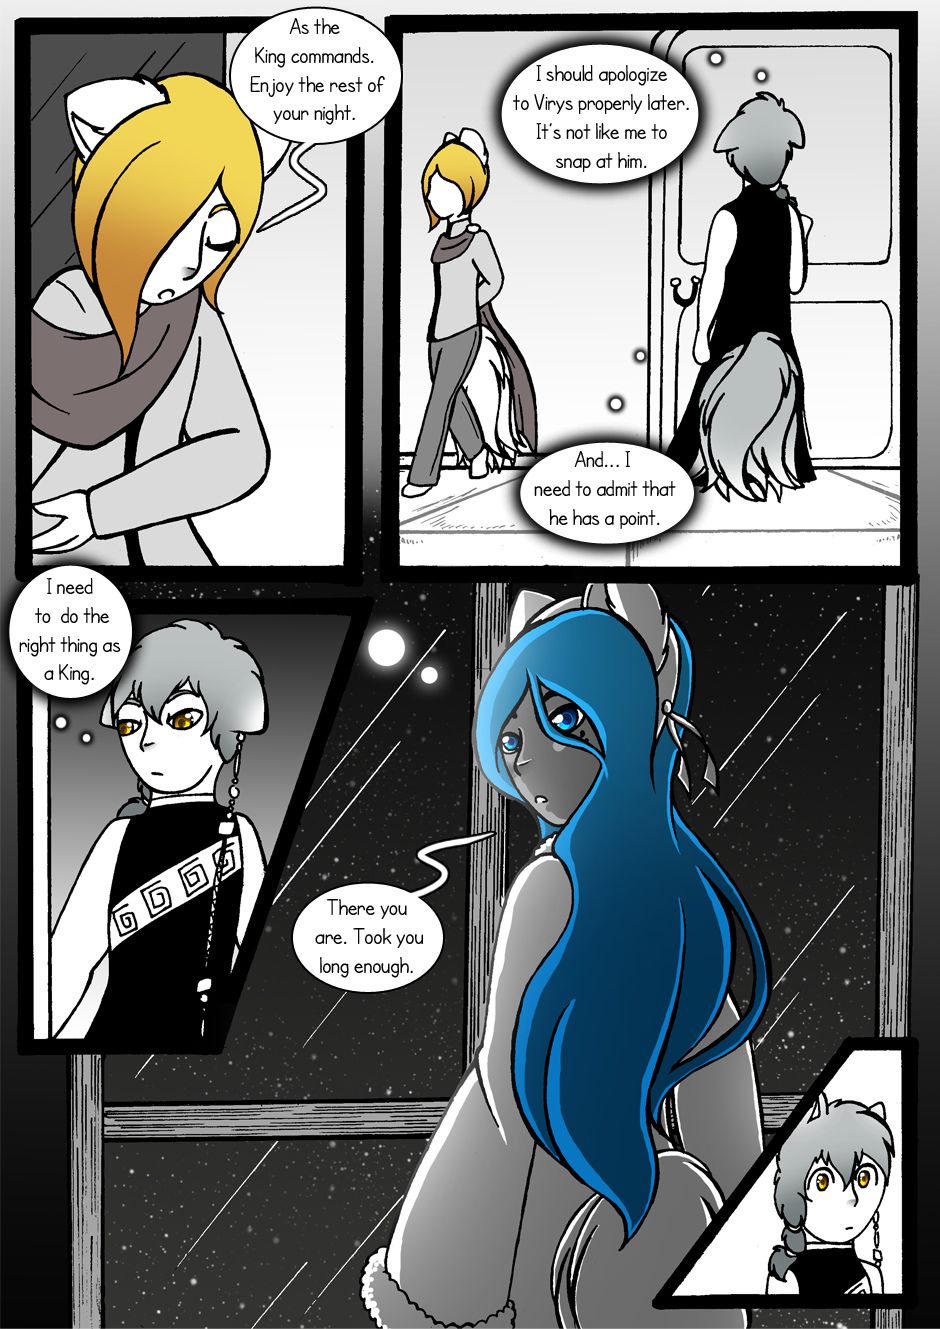 [Jeny-jen94] Between Kings and Queens [Ongoing] 99